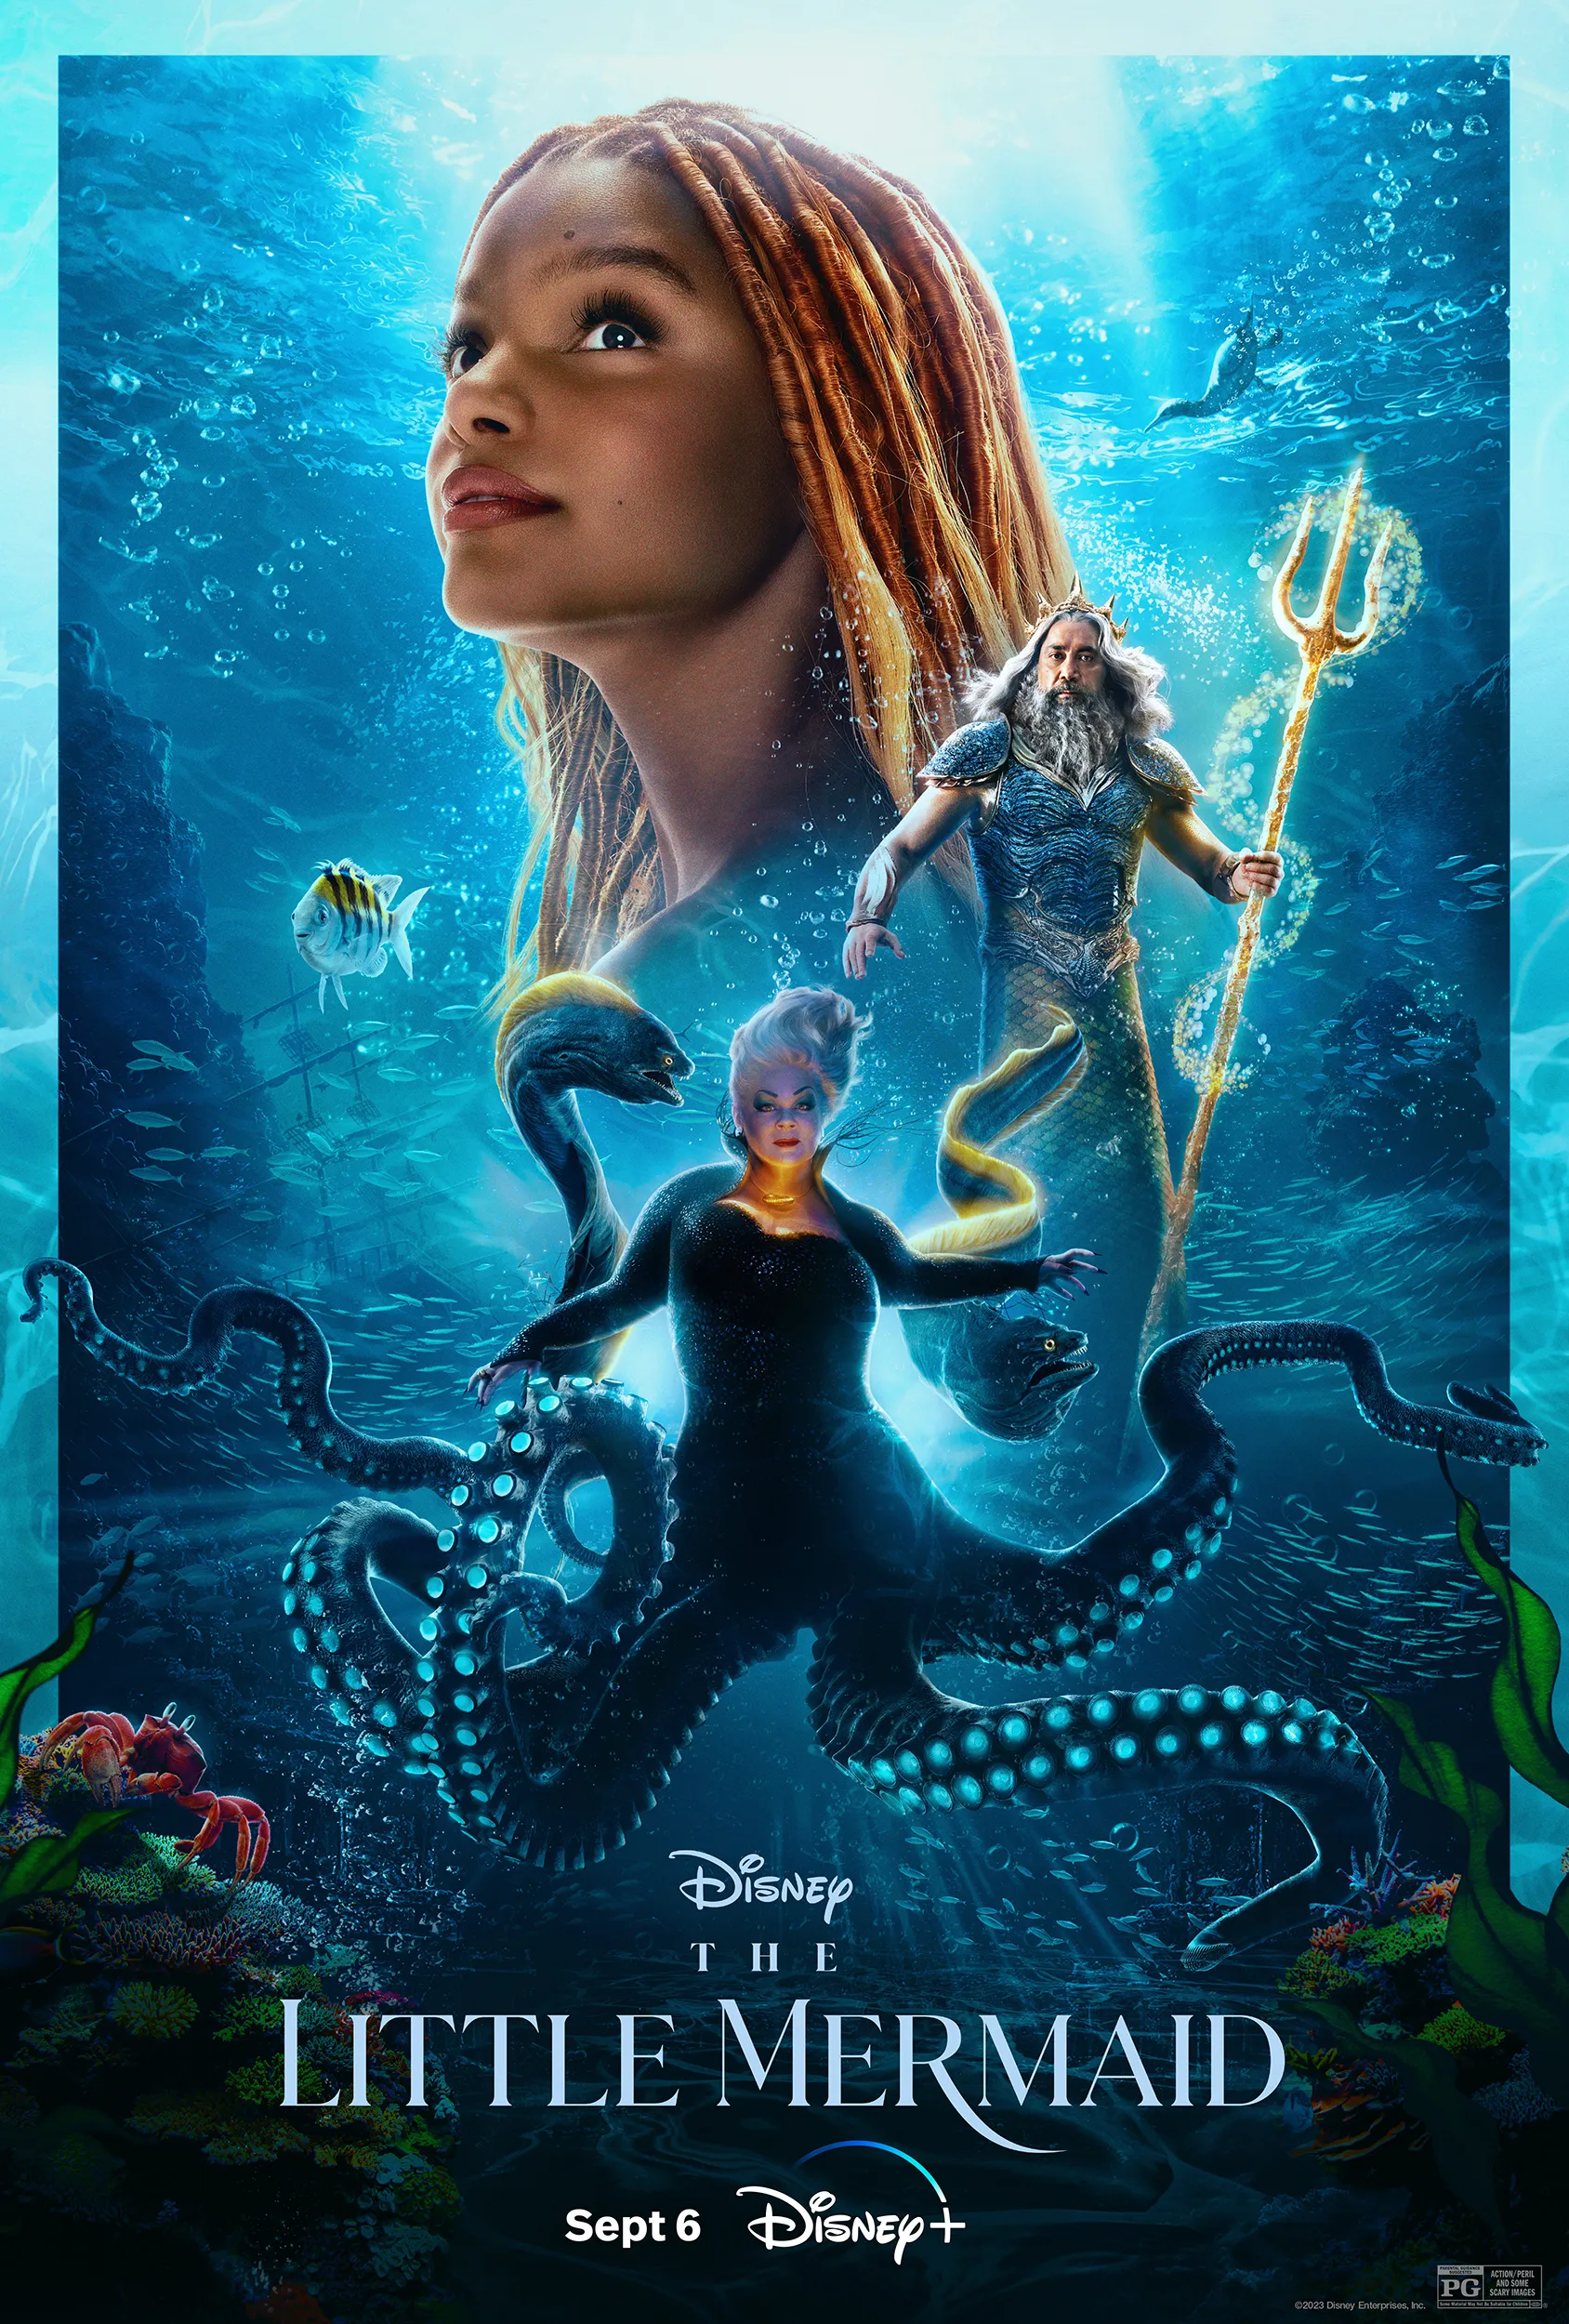 Disney’s Live-Action Reimagining of “The Little Mermaid”– Available to Stream Now